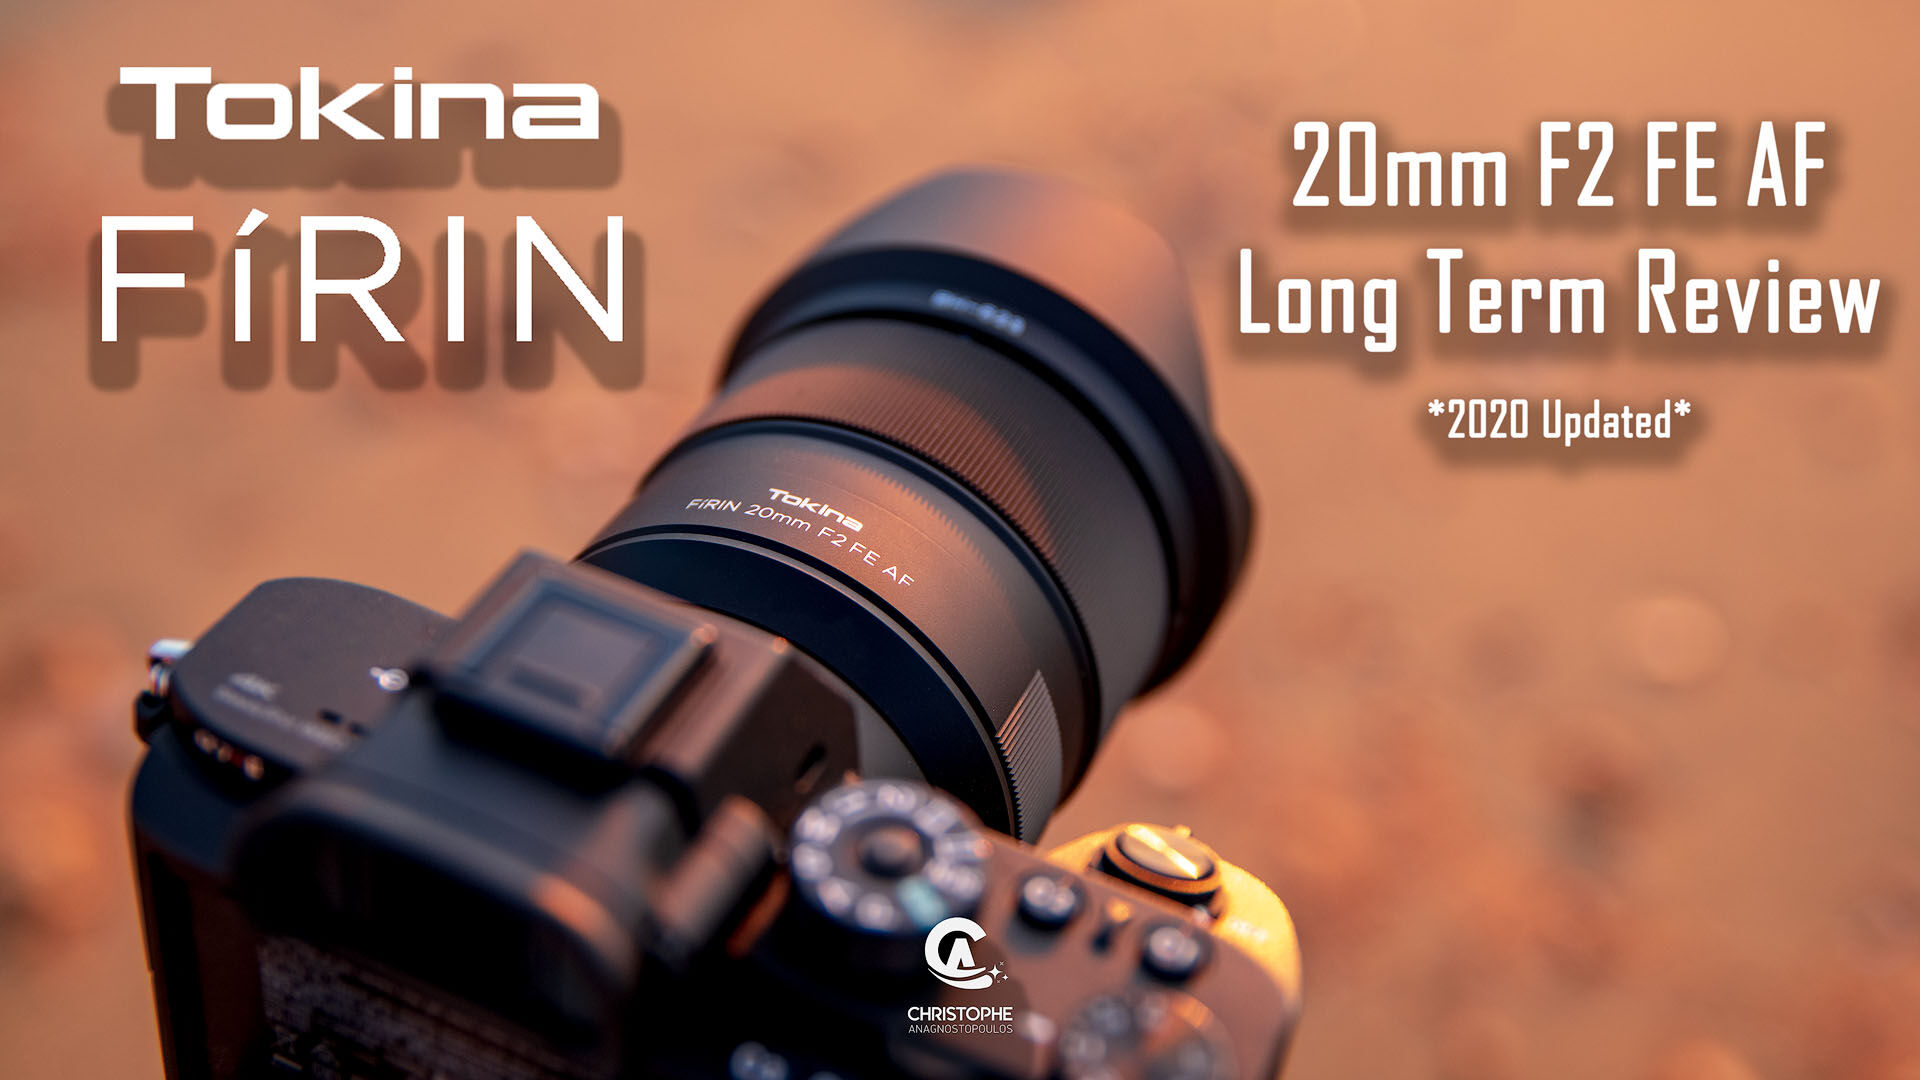 Tokina Firin 20mm F/2 AF Review - Christophe Anagnostopoulos